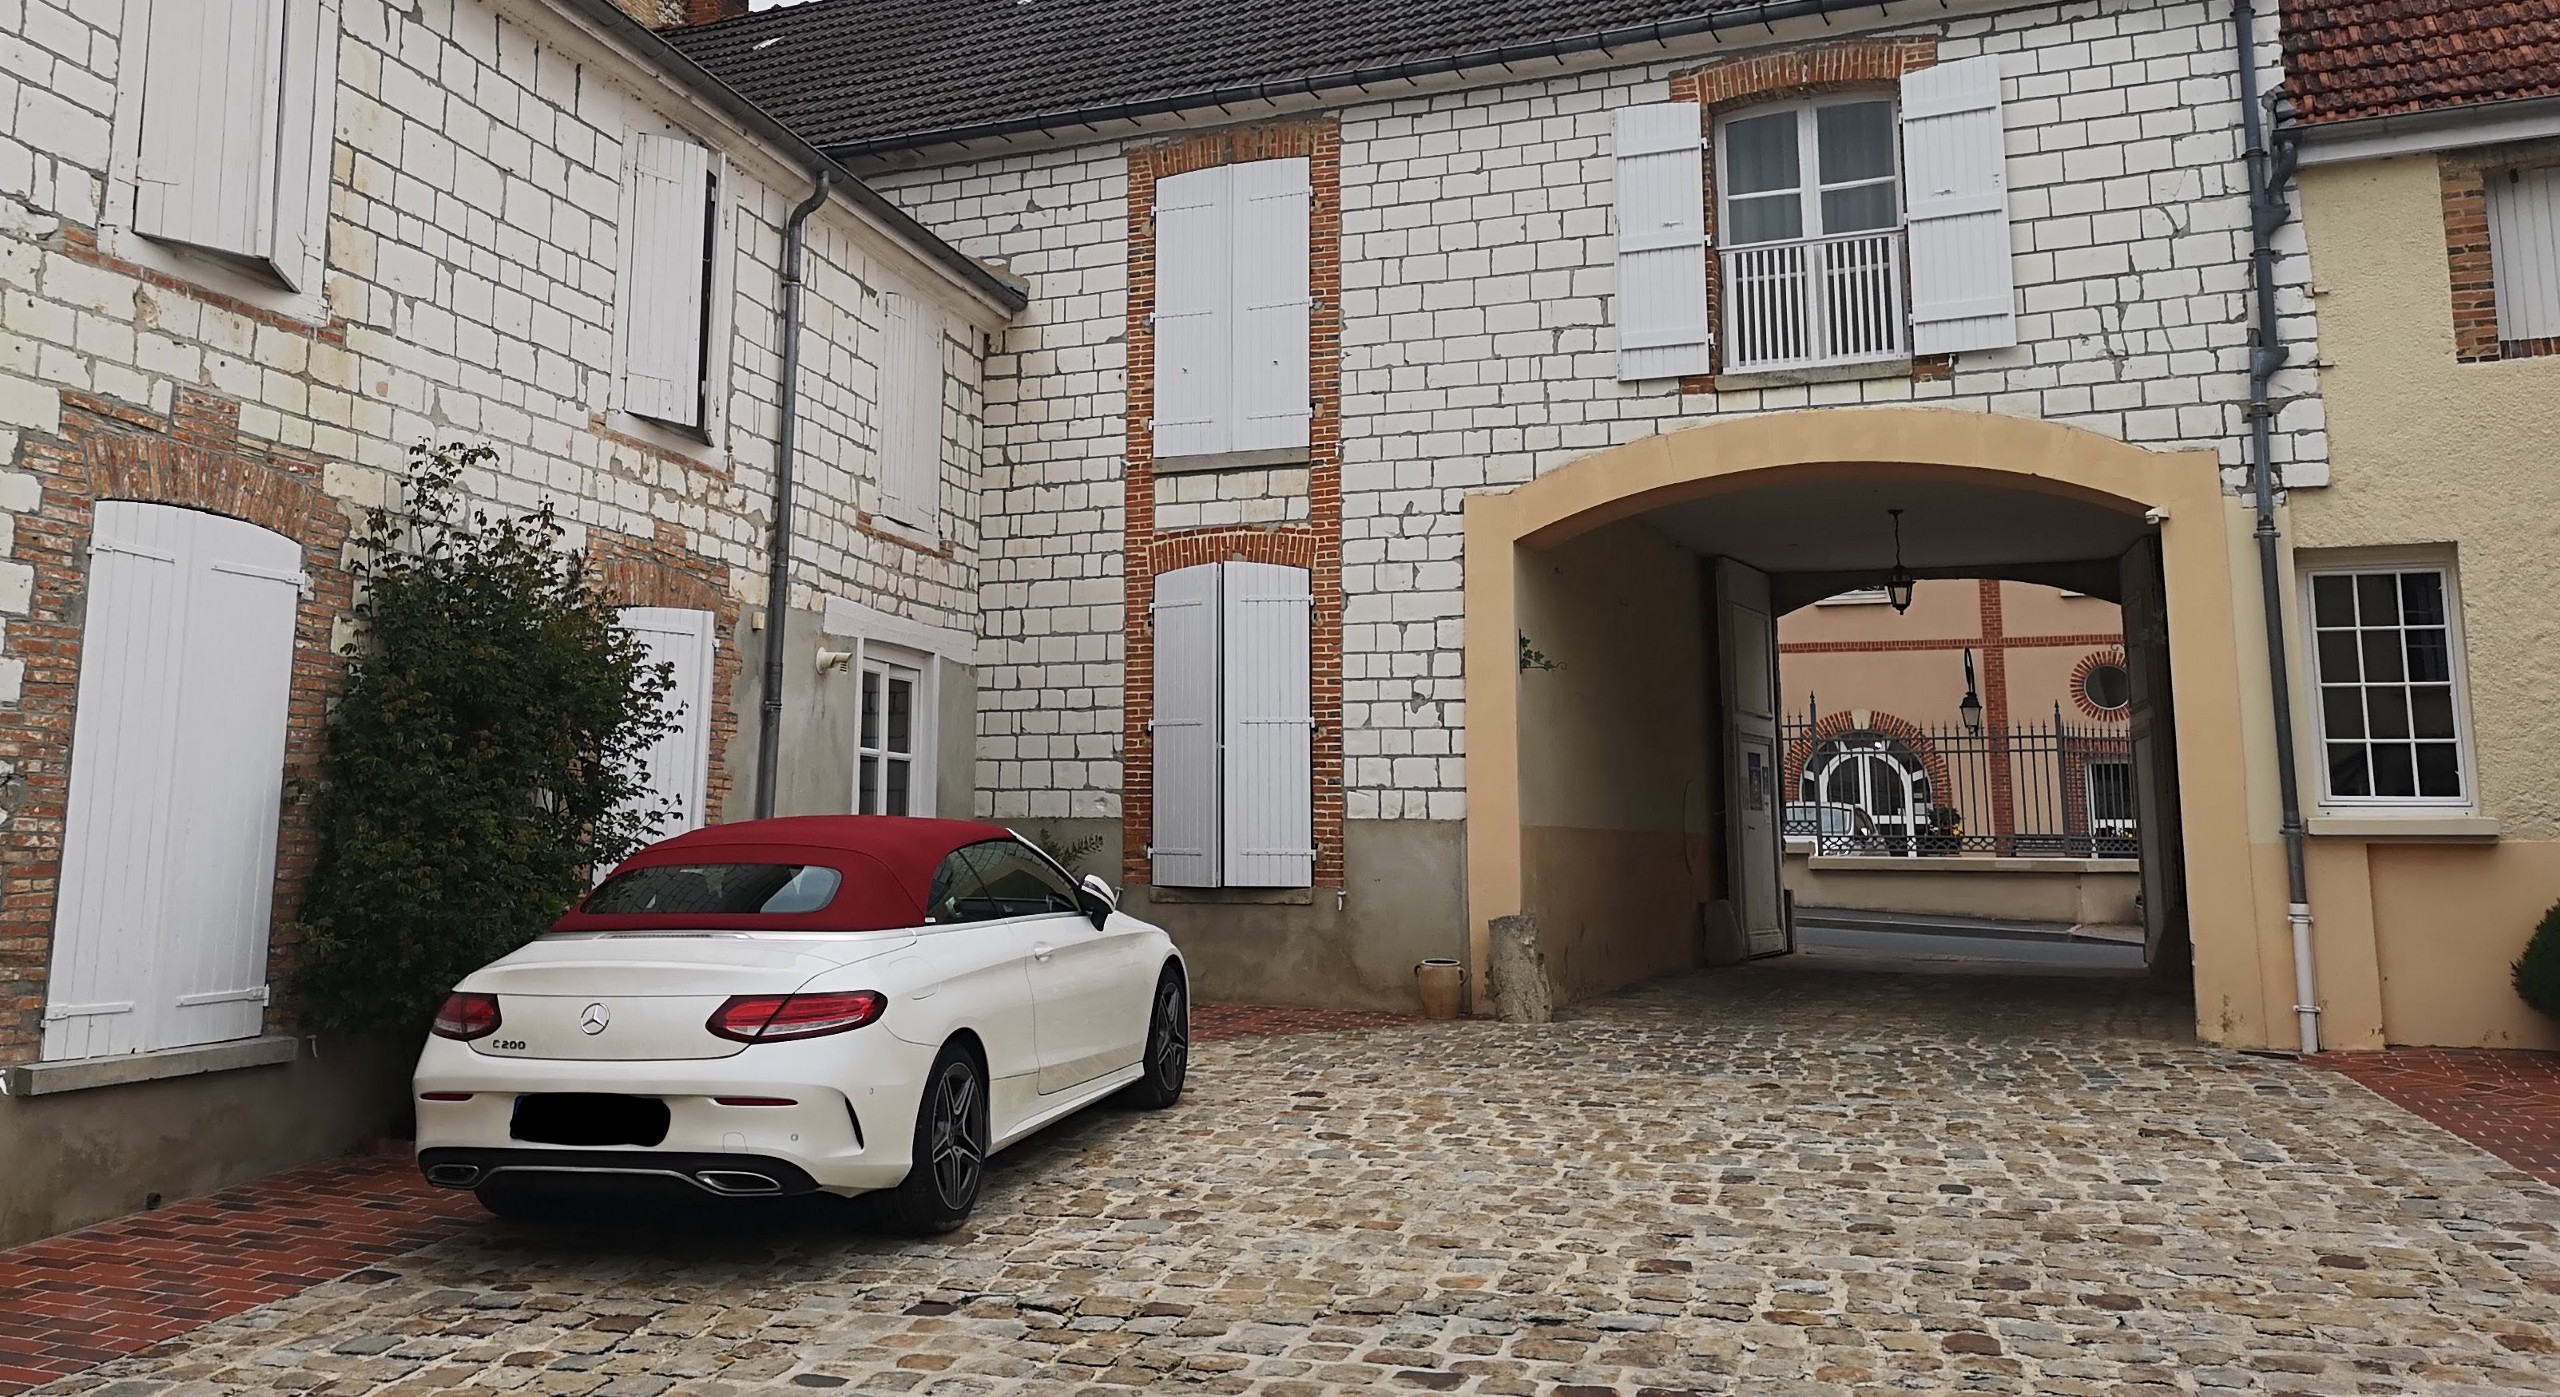 A Mercedes parked outside of a house